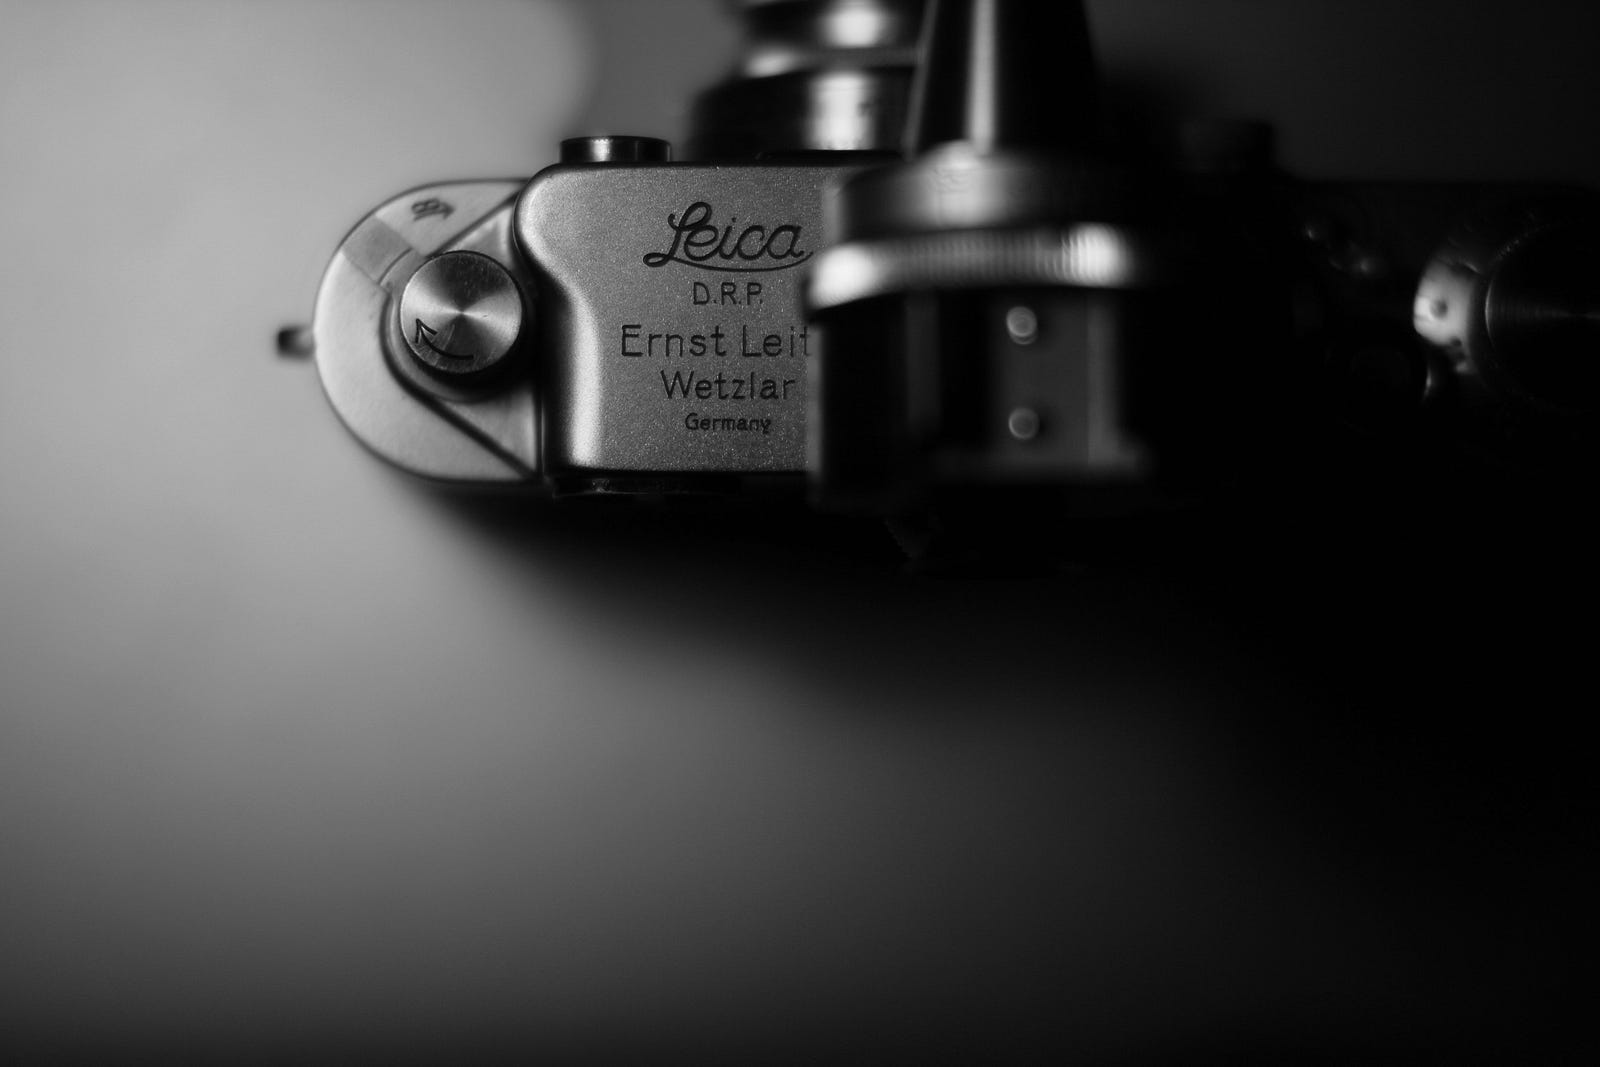 A black and white image of an old, film-based Leica camera (as seen from above). Photography adds a creative element to my experience, allowing me to preserve memories, share my adventures with others, and see the world through a new lens as I take my walk.